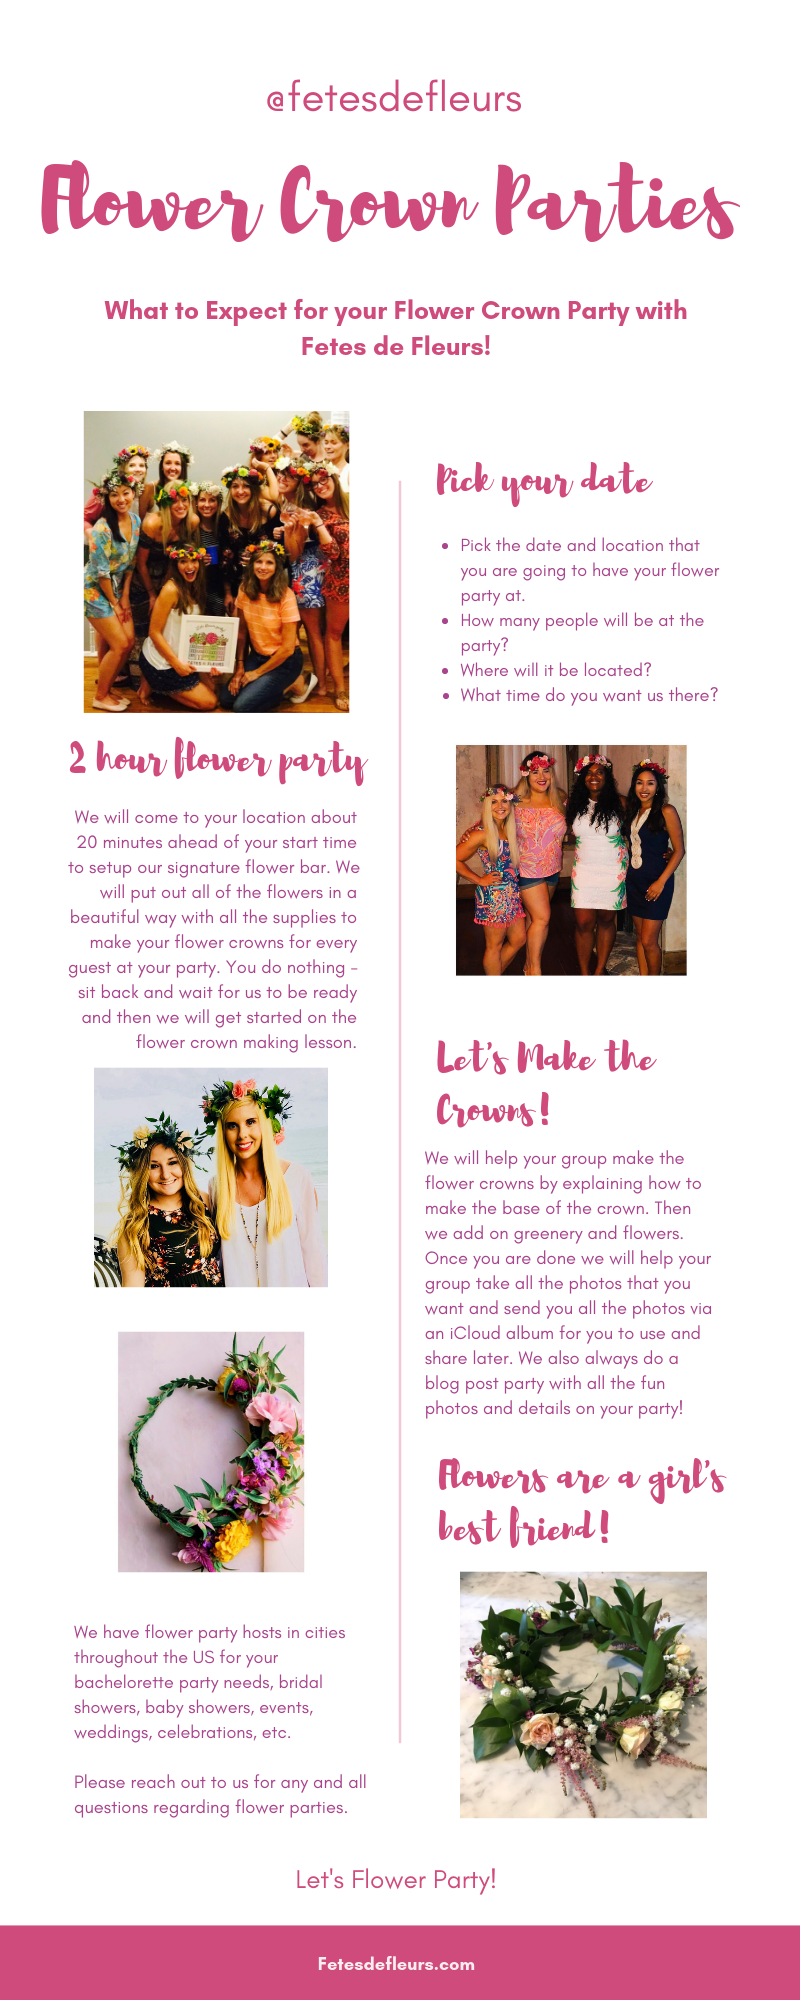 flower crown parties - what to expect 